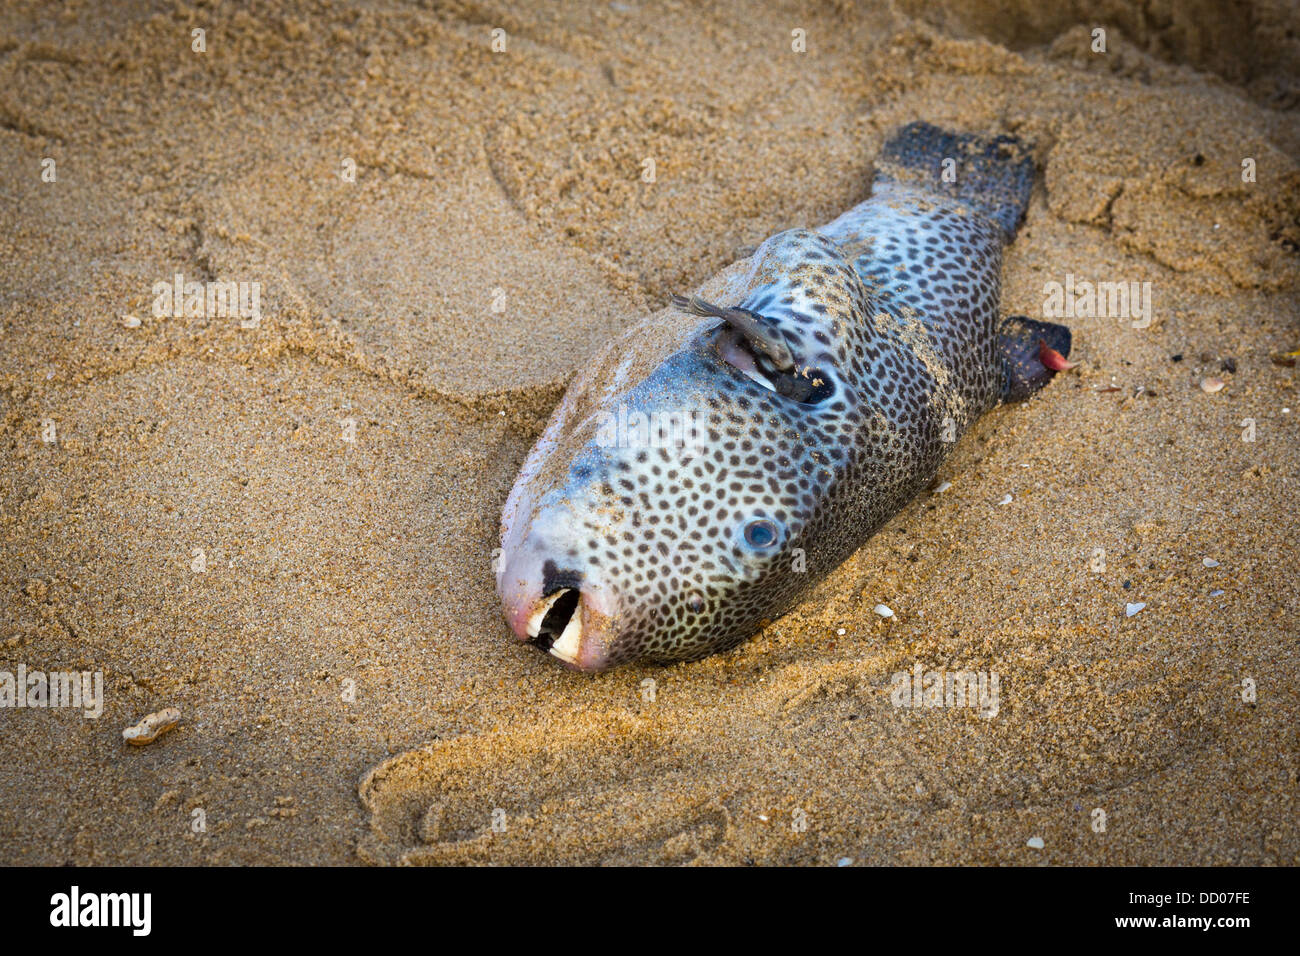 A dead turtle on the Indian Ocean Stock Photo